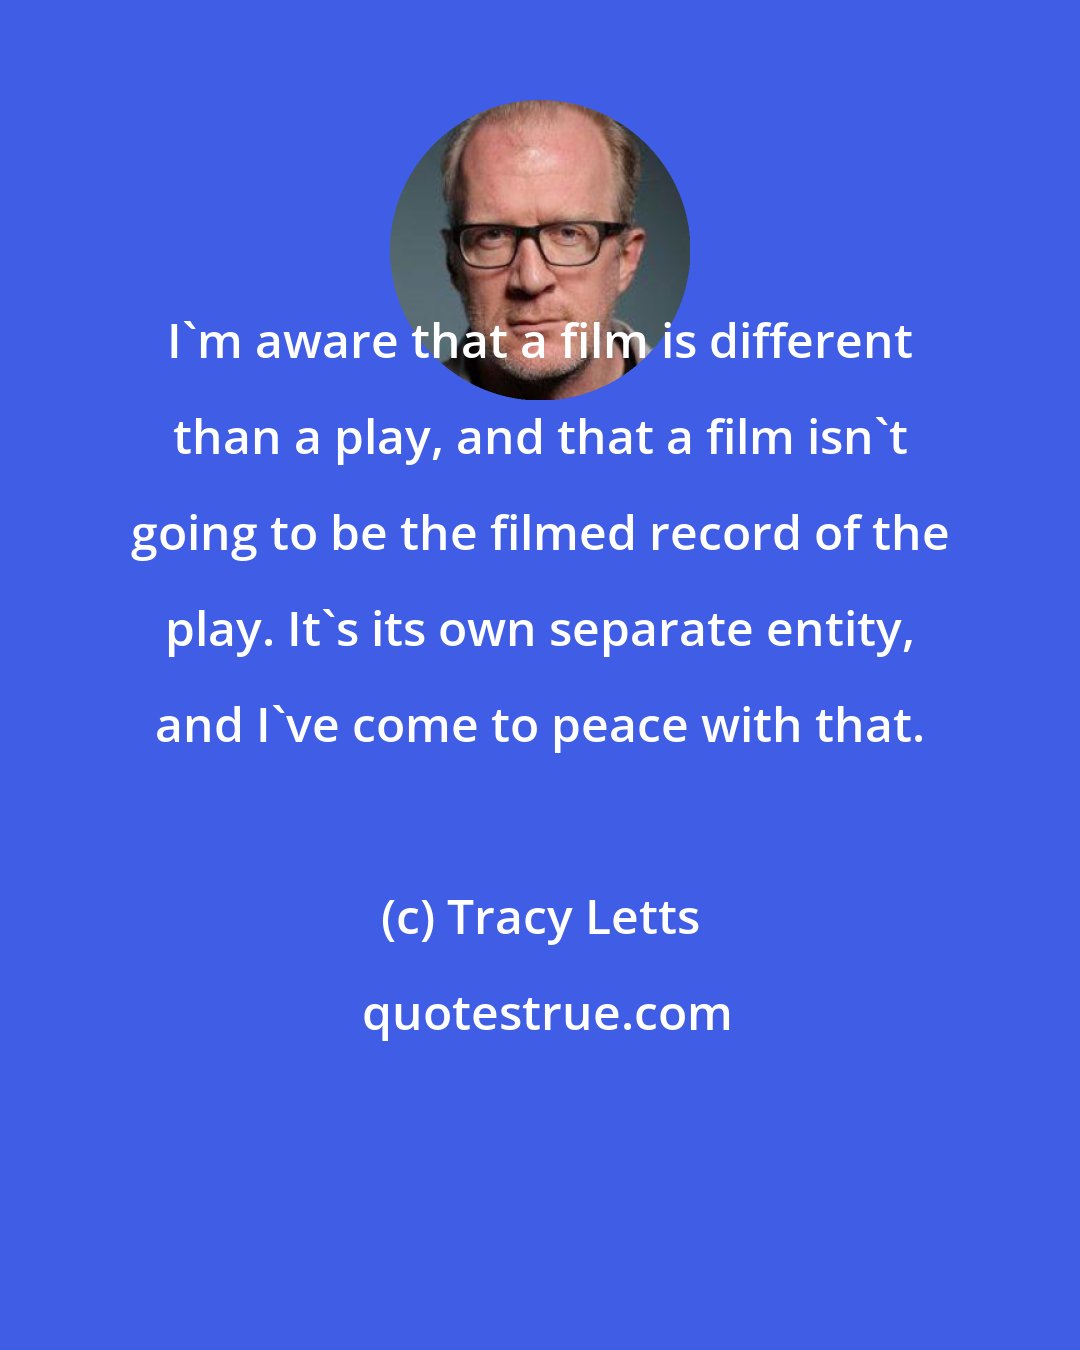 Tracy Letts: I'm aware that a film is different than a play, and that a film isn't going to be the filmed record of the play. It's its own separate entity, and I've come to peace with that.